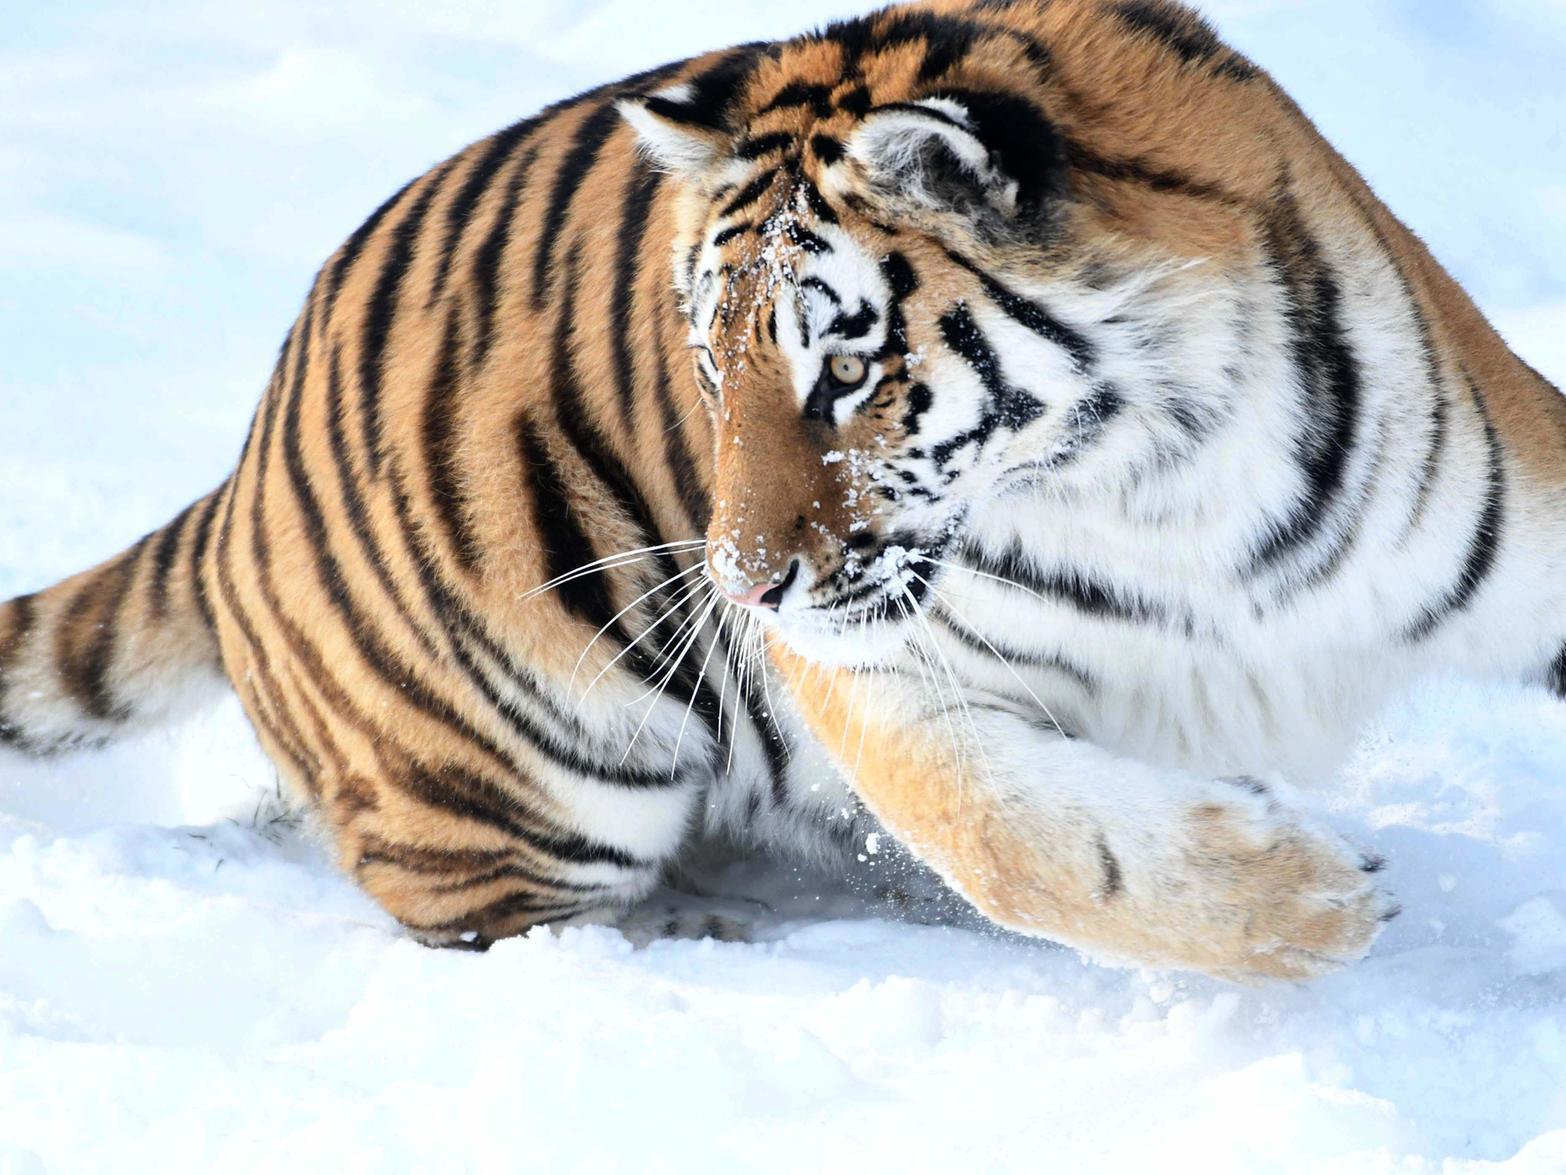 The year began with the Amur Tigers enjoying the winter snow as temperatures dropped closer to those of their natural habitat in Russia. Only 500 Amur Tigers survive in the wild.